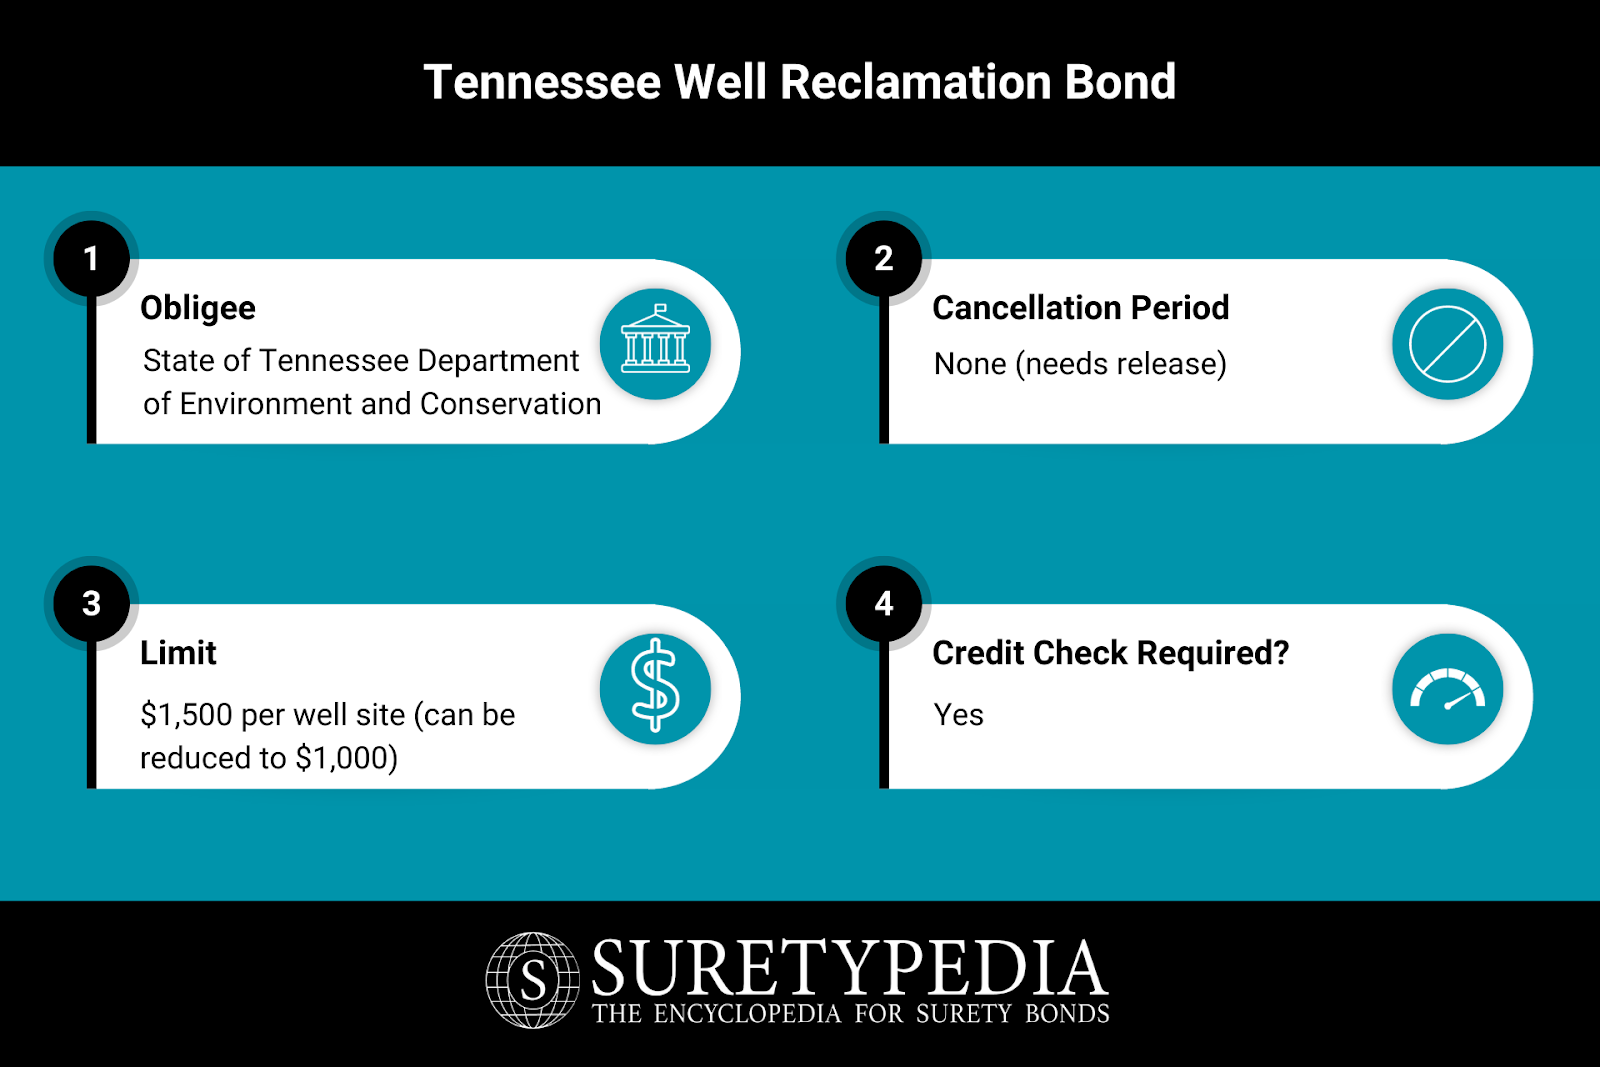 Tennessee Well Reclamation Bond